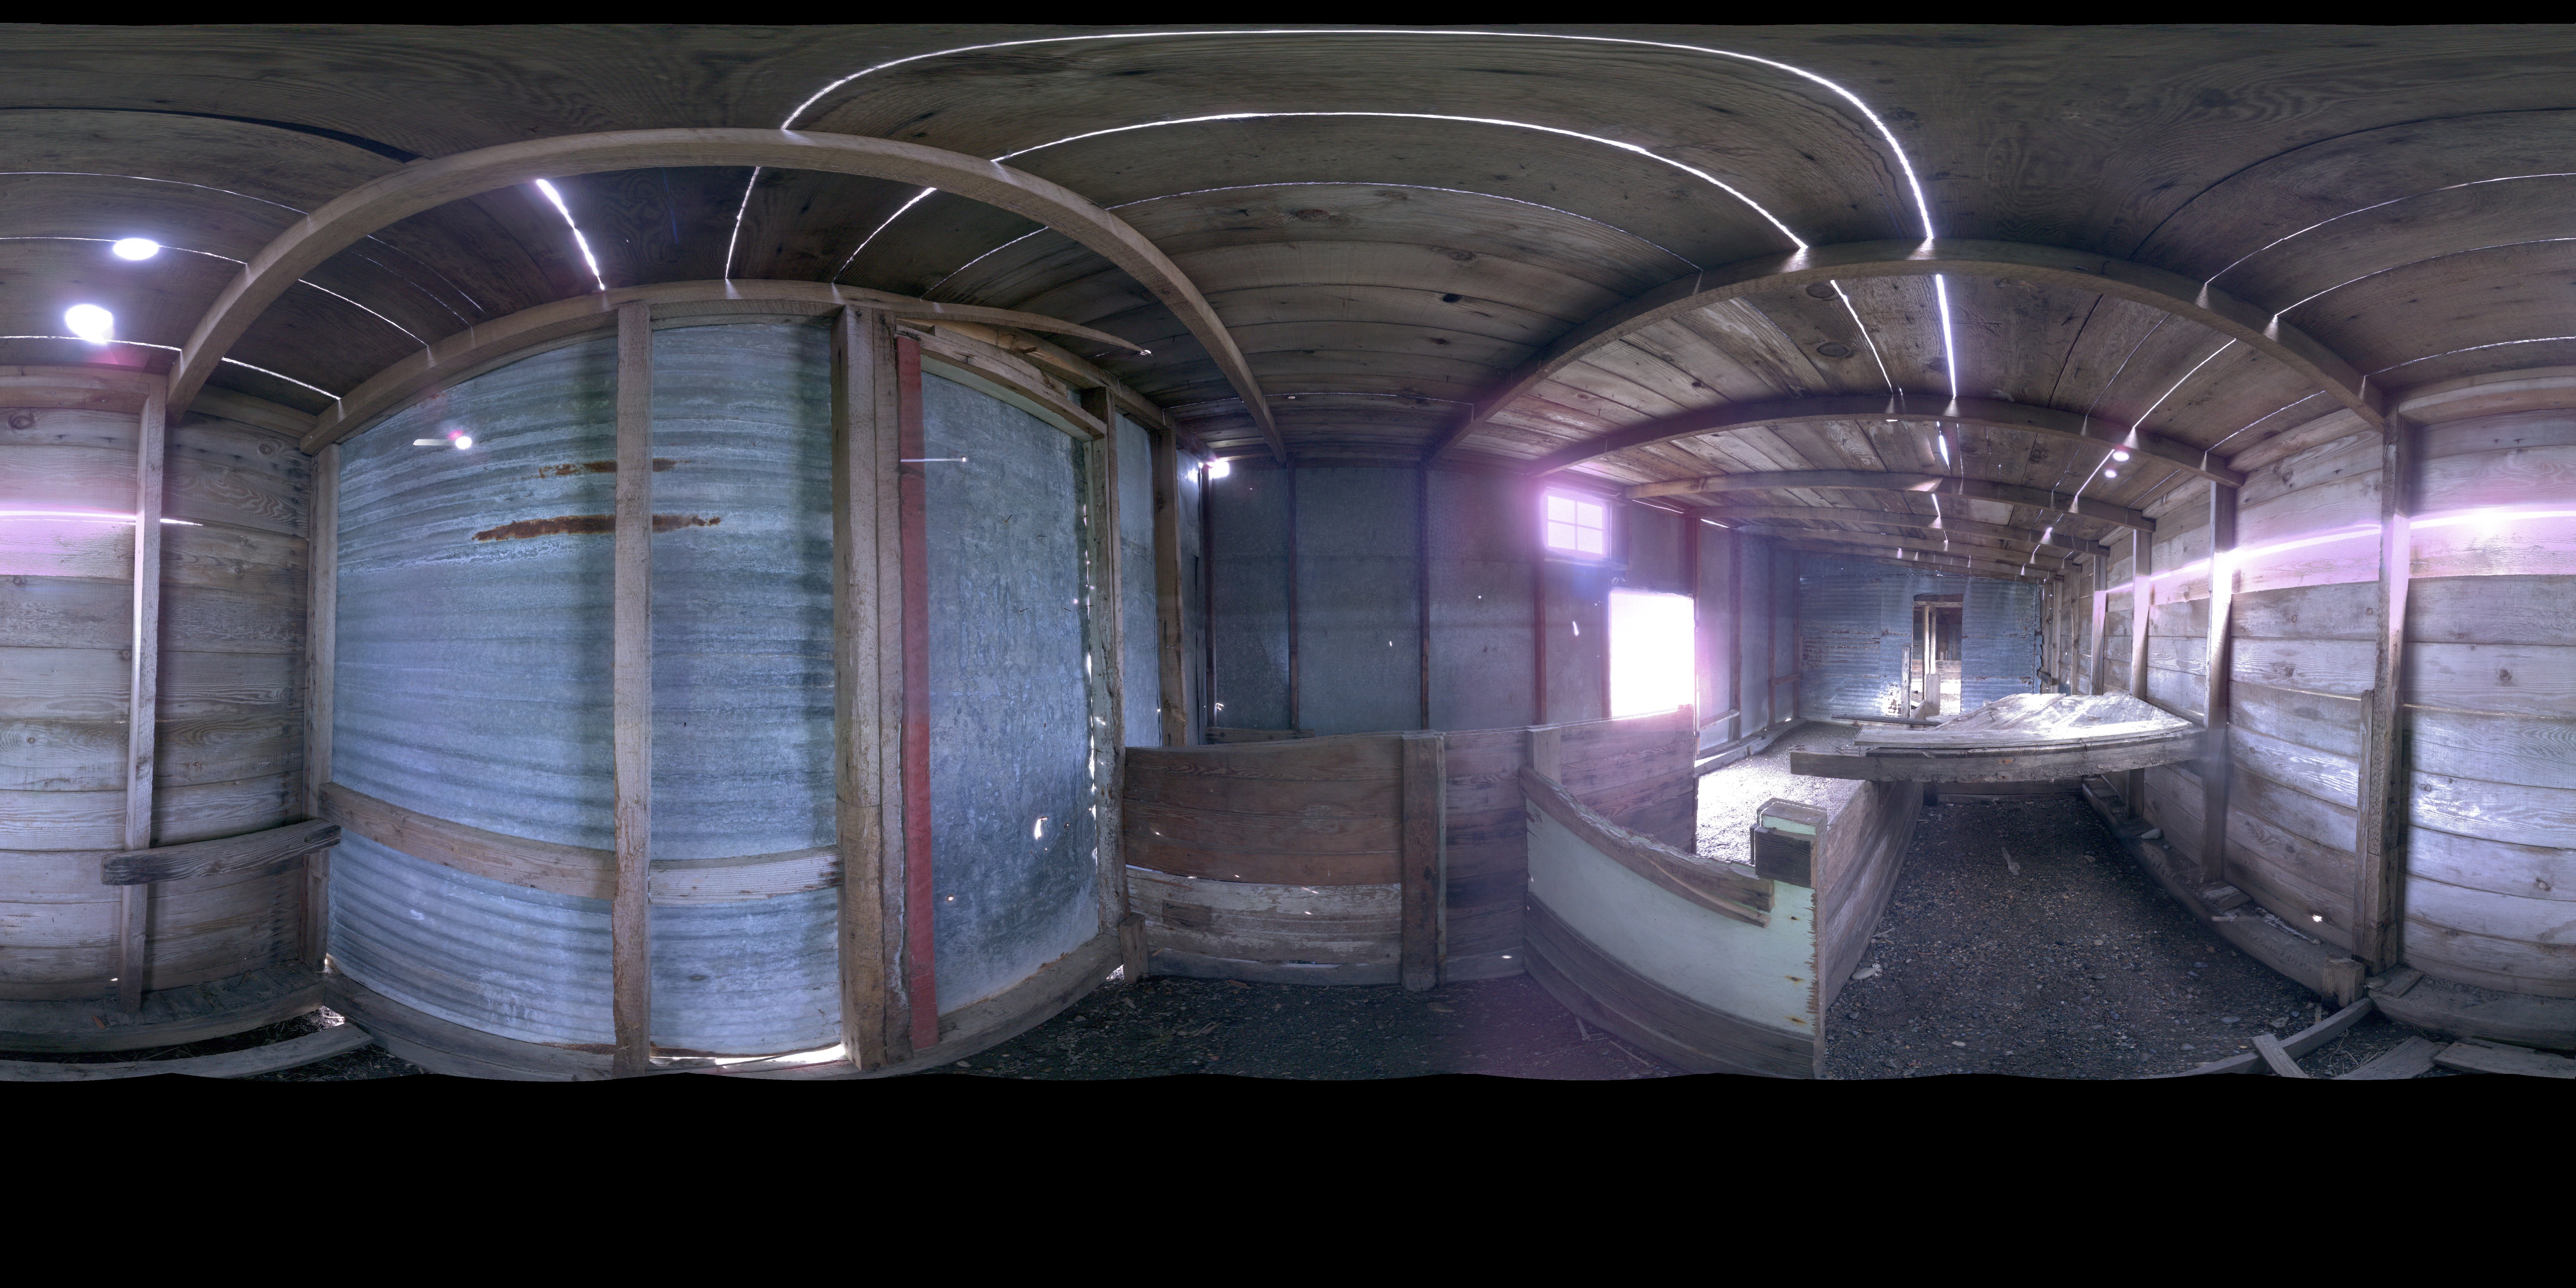 Panoramic view of the RCMP Dog Kennels and Run from the Leica BKL 360, scanning location 3.